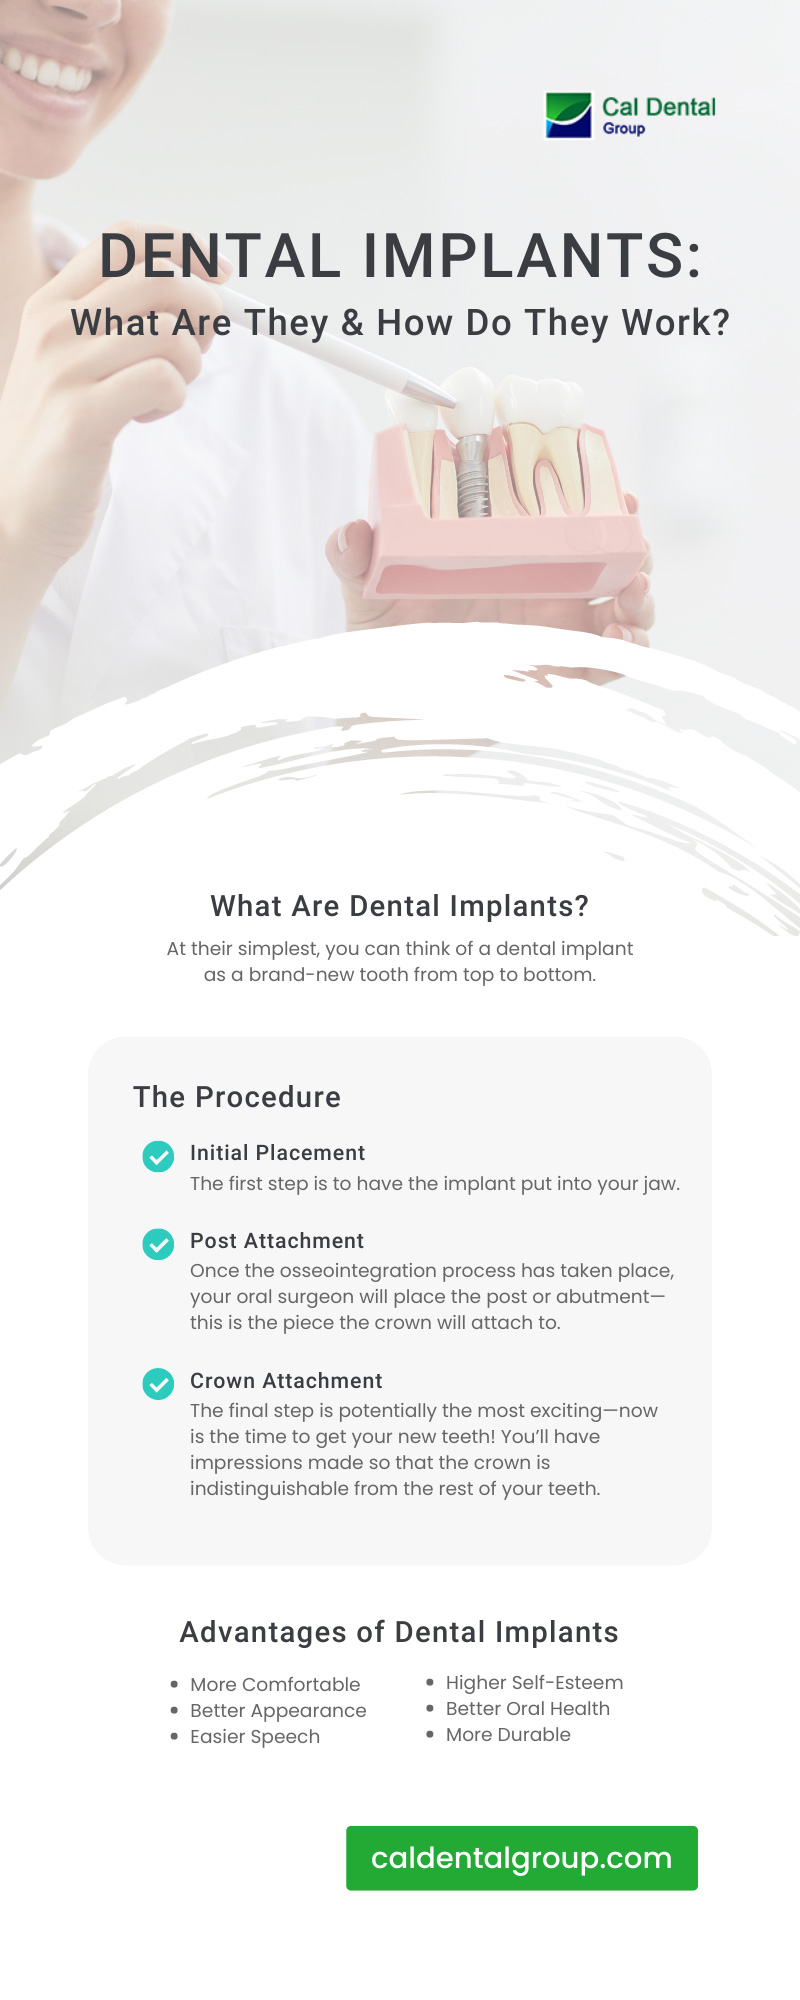 Dental Implants: What Are They & How Do They Work?